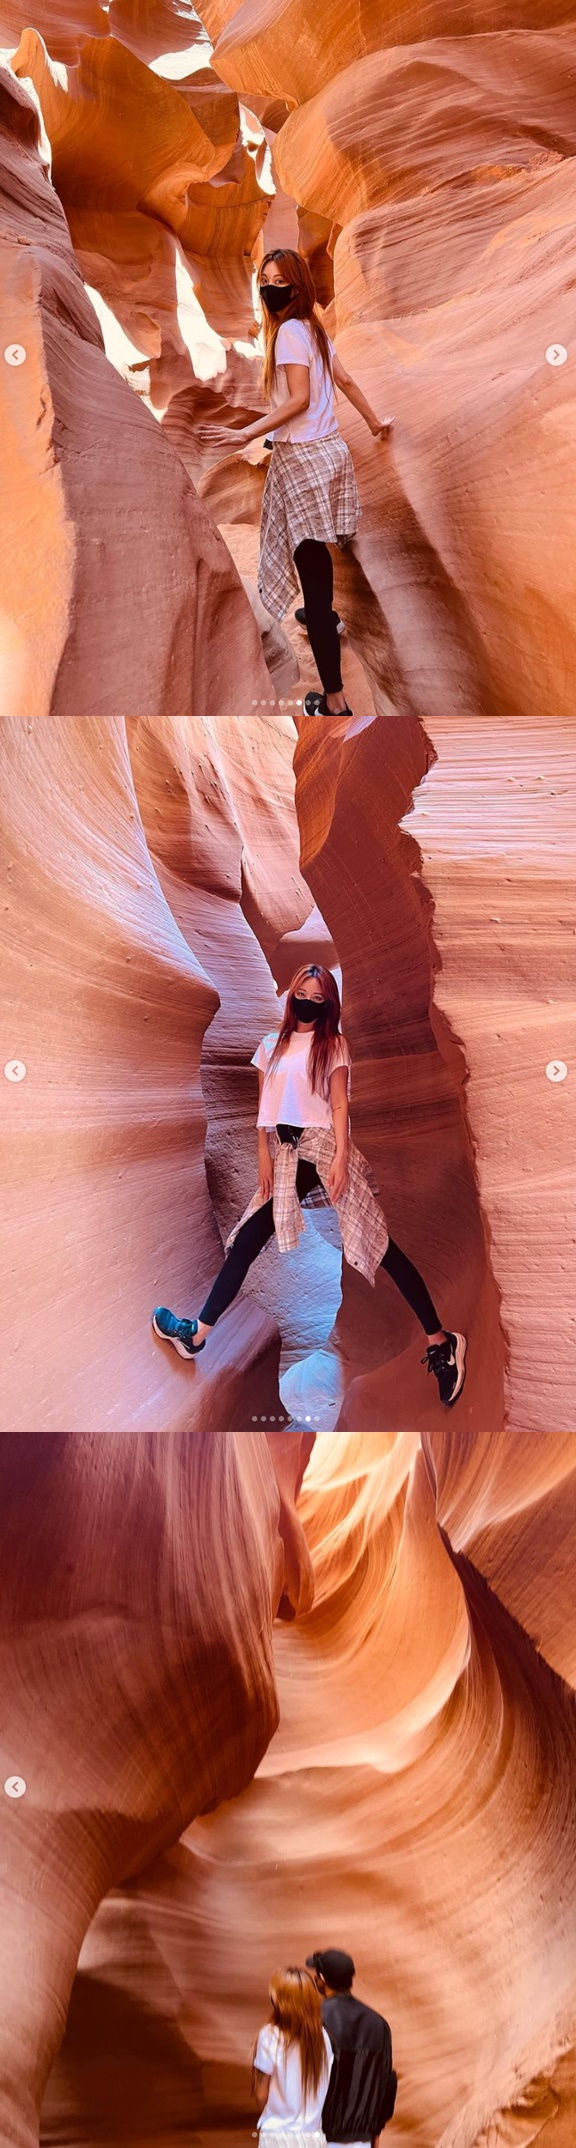 Han Ye-seul recently revealed his current status on his SNS trip to United States of America with his younger boyfriend.On the 2nd, HIKING THROUGH WONDERs posted a picture of the tour of Entelloff Canyon.In the photo, Han Ye-seul touched or stepped up the canyon wall and climbed up to Celebratory photoThe problem is that the place is prohibited from stepping on such a touch and climbing.It is said that there is a sign that says that you should not do Touch when you do the tour, and that you will not hike or ride on the tourist sign.It is good to travel with a loved one abroad, but criticism is pouring into the appearance of the Microceptions and posting them on SNS.